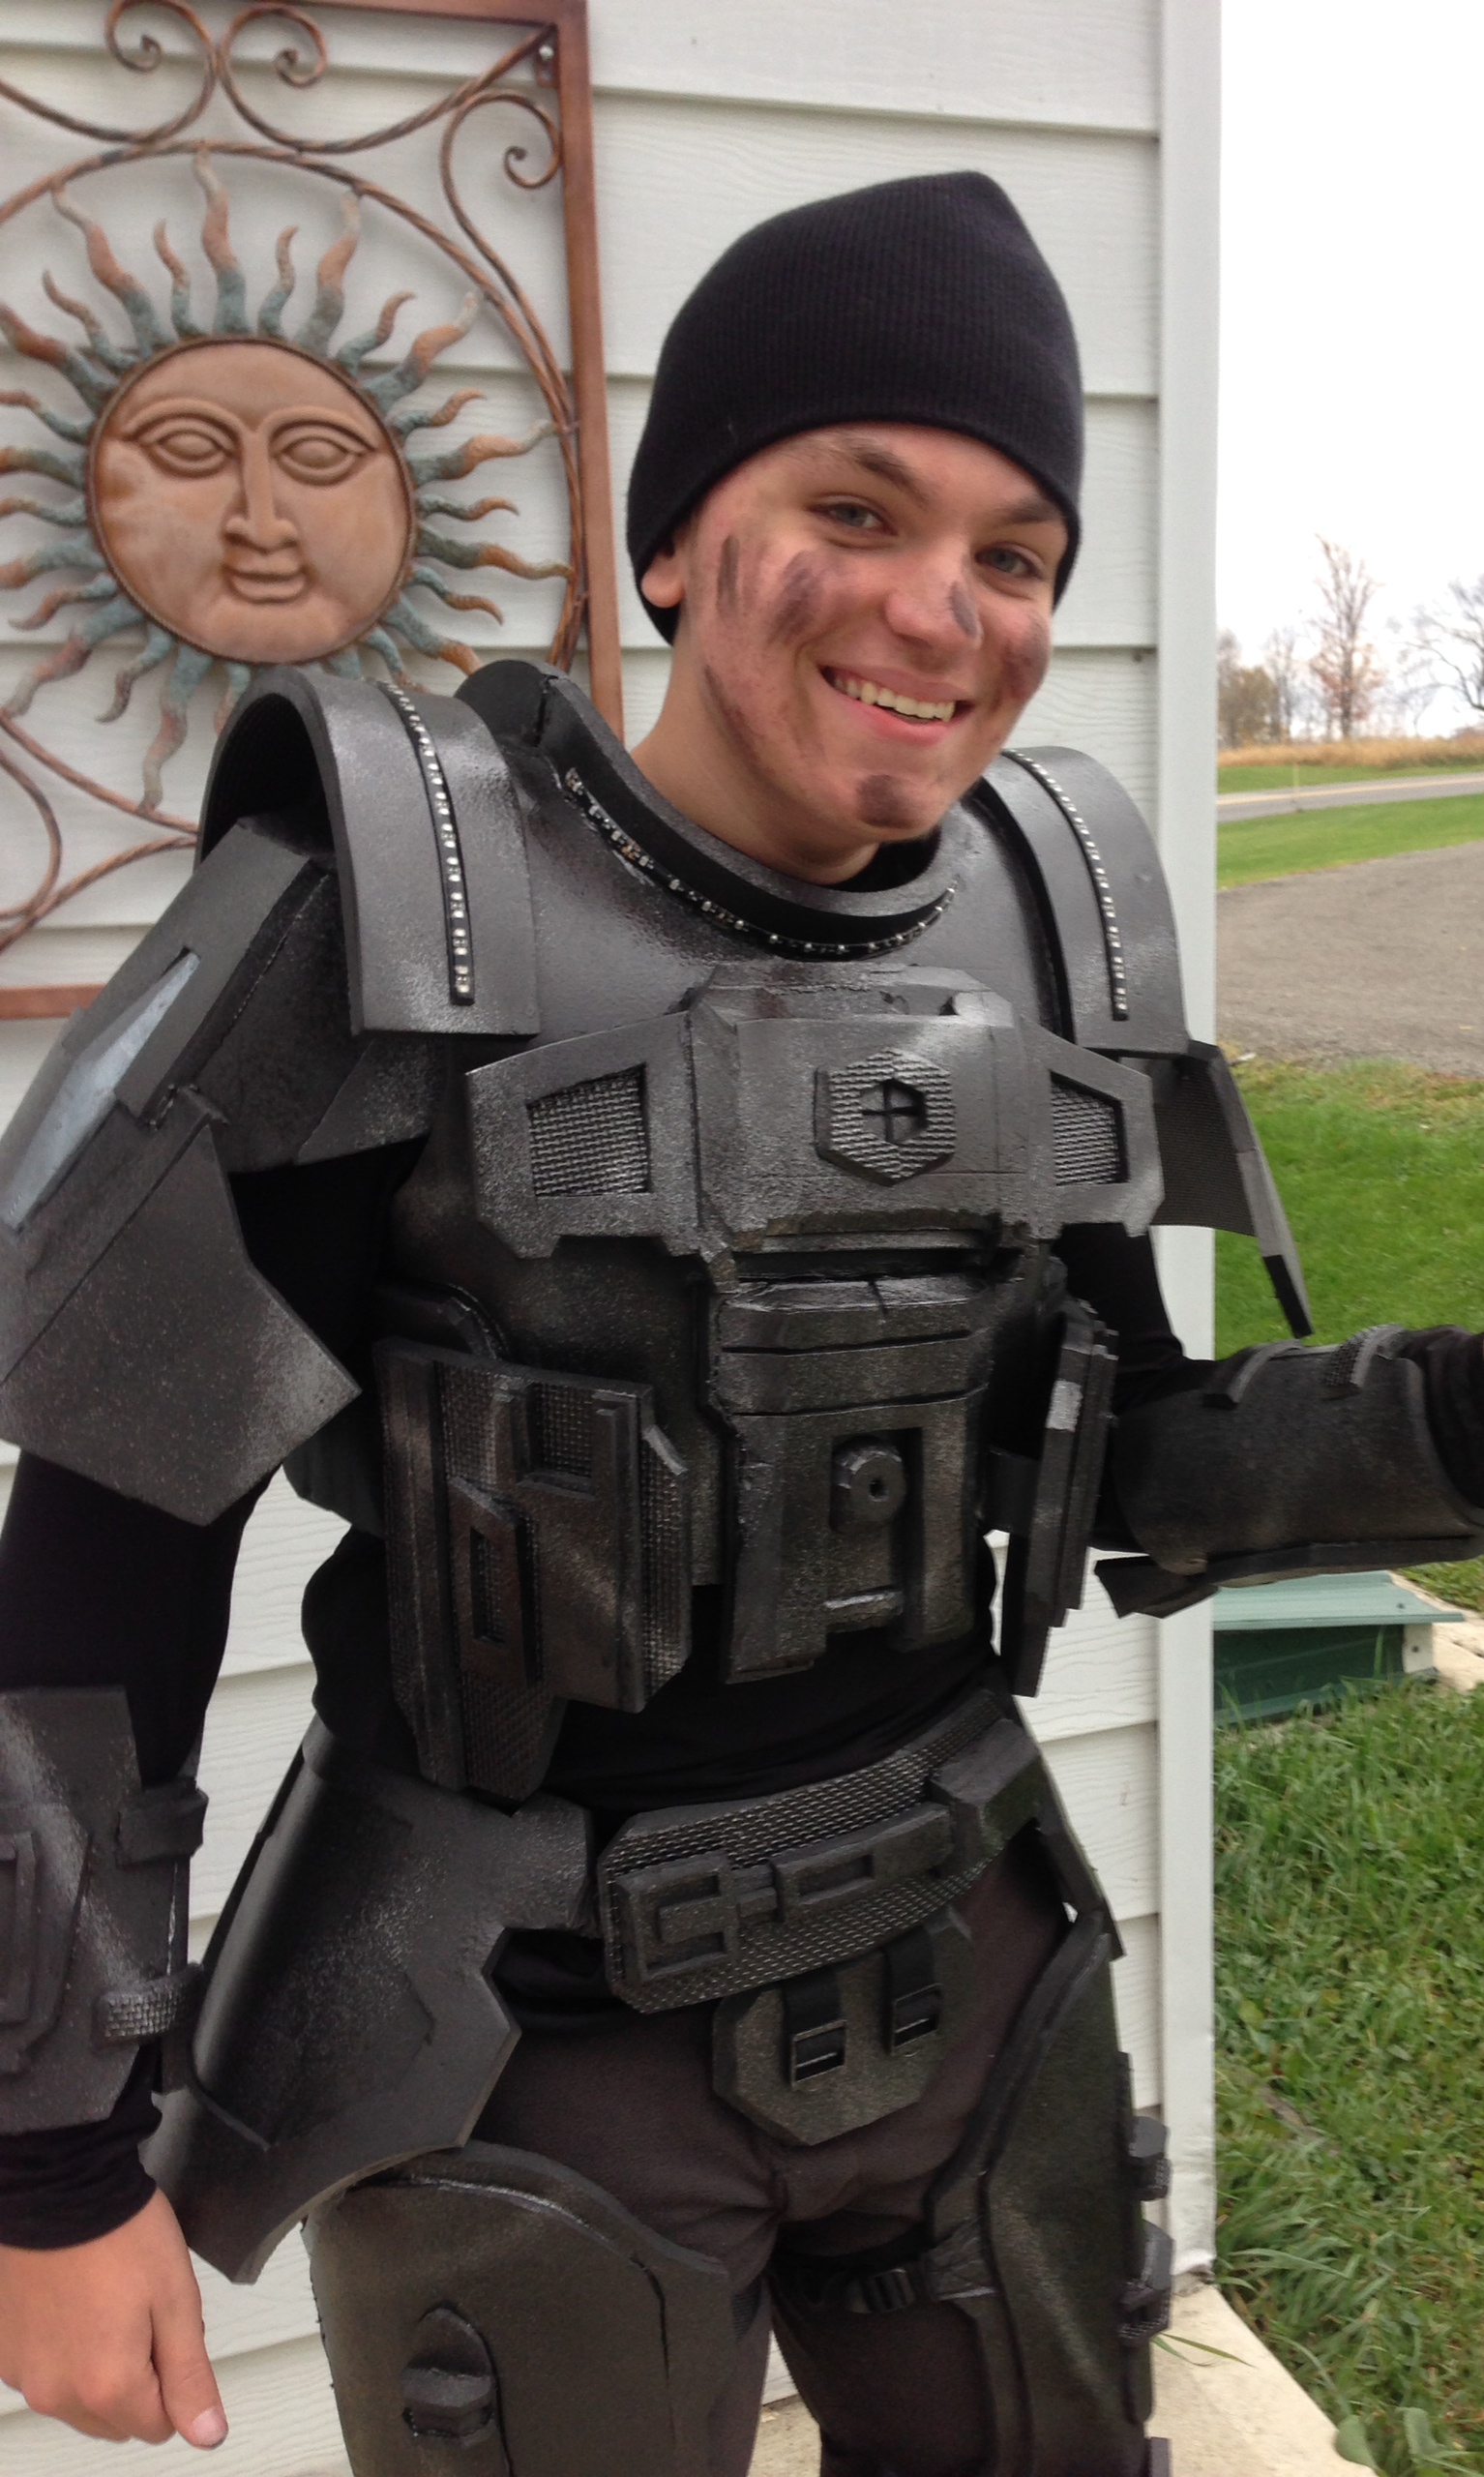 My first attempt at an odst costume